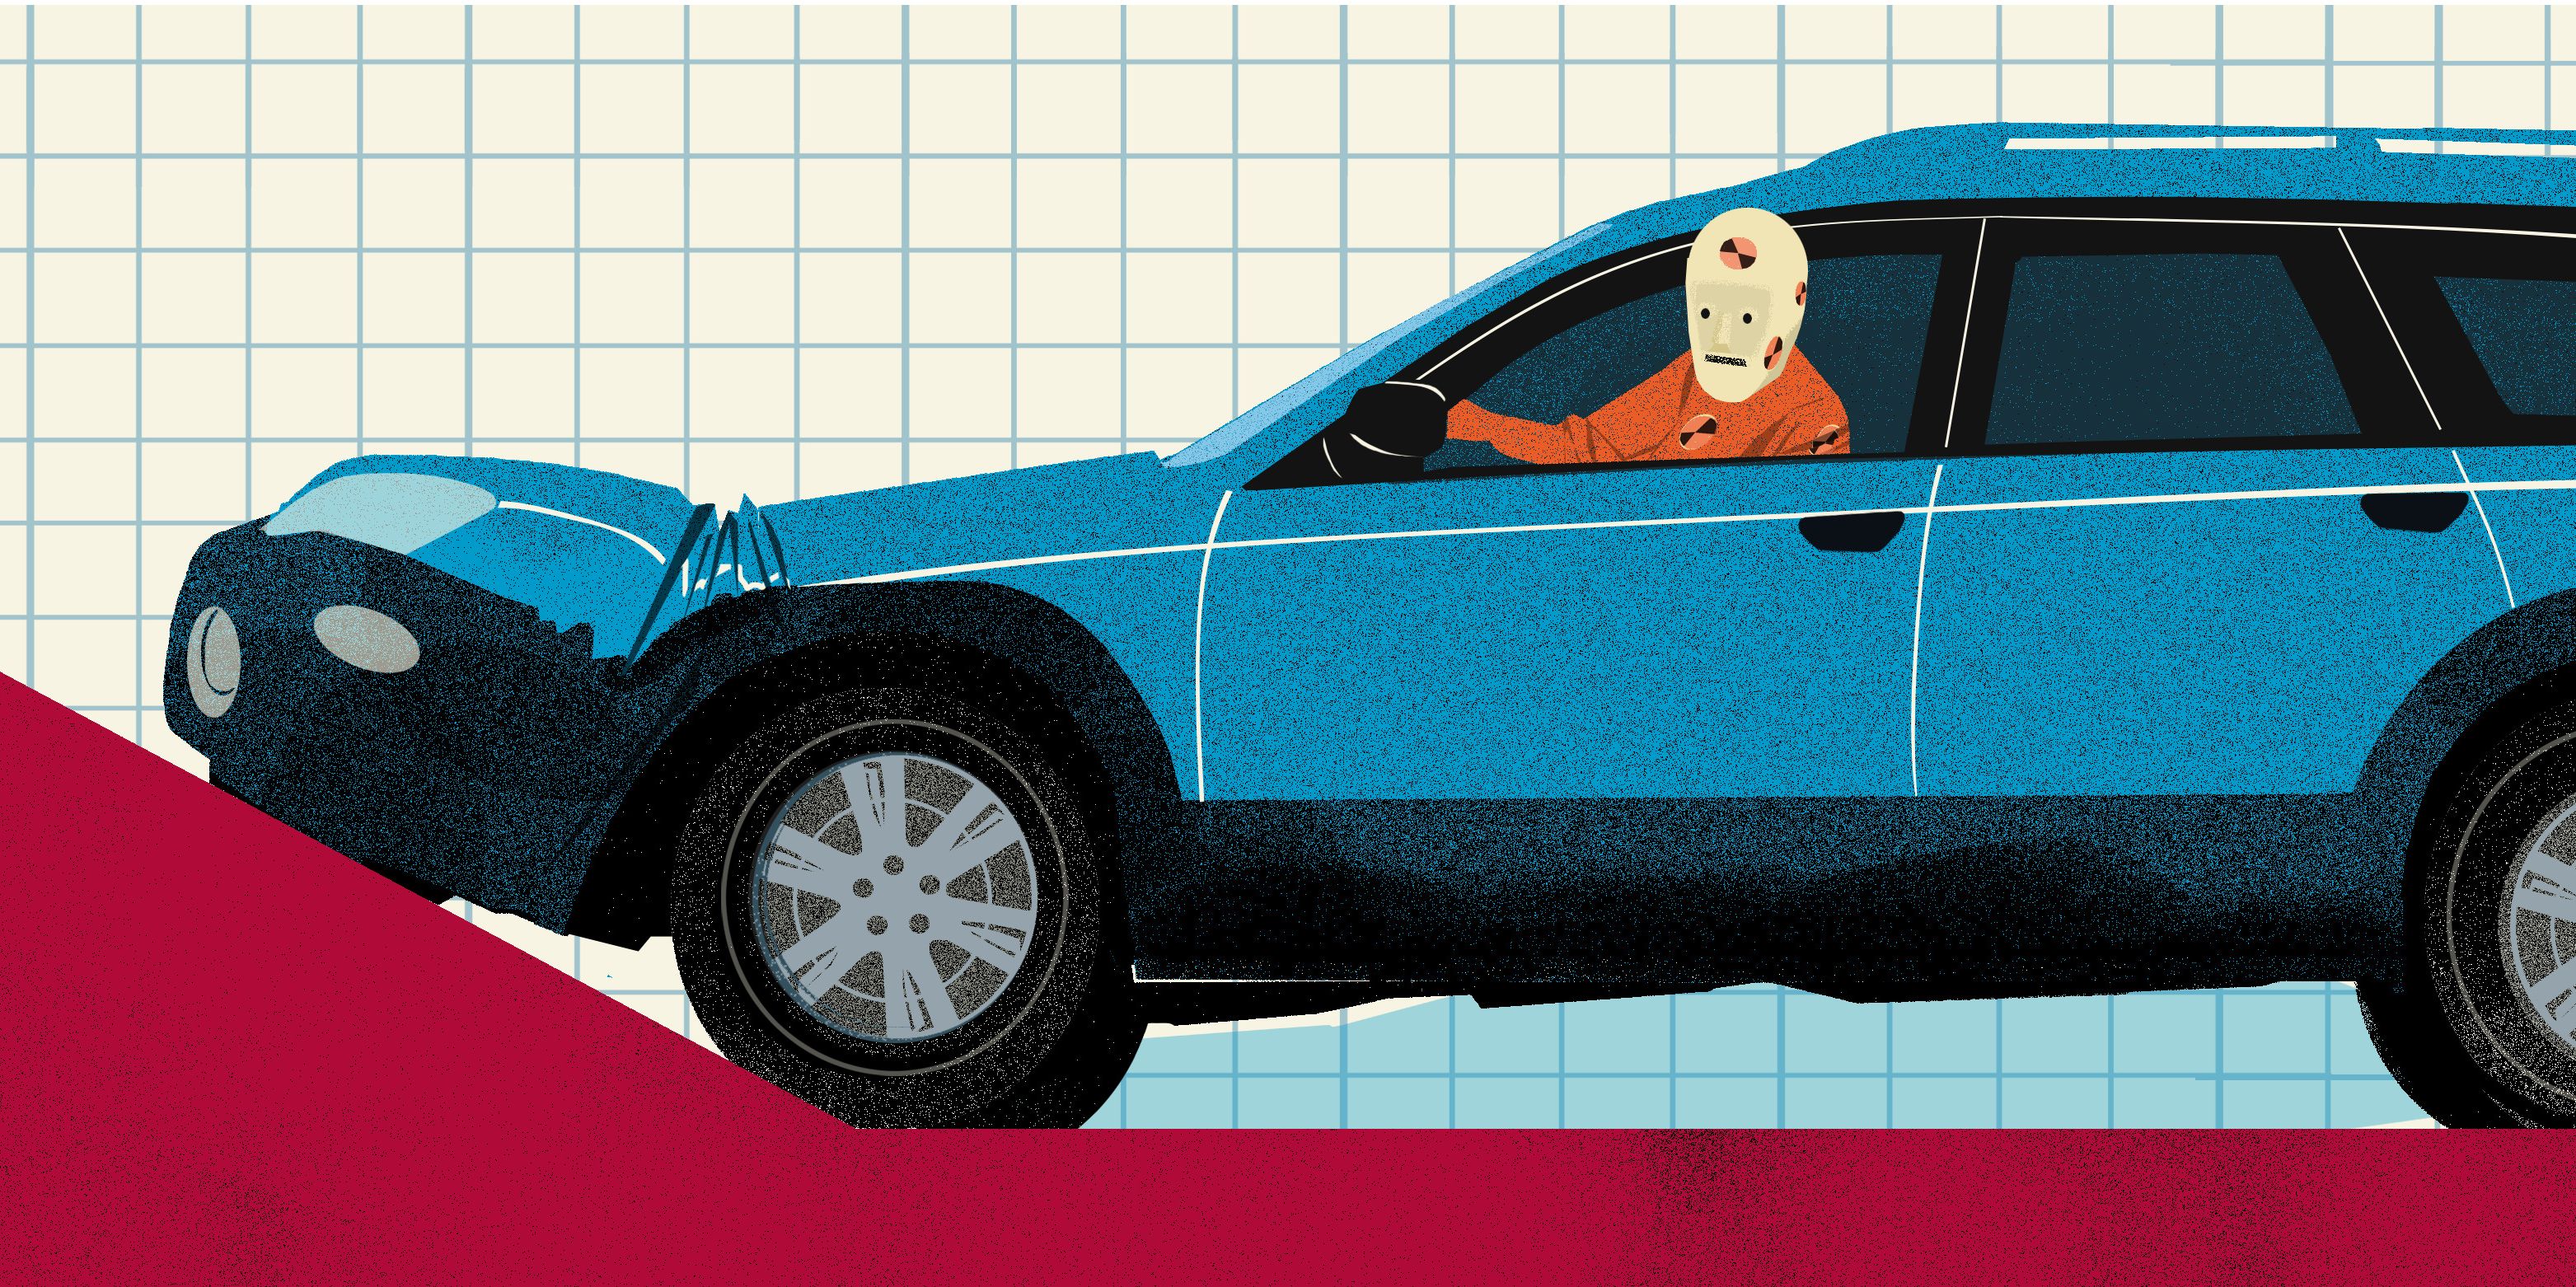 How Ugly Chins Help SUVs Dodge Regulations